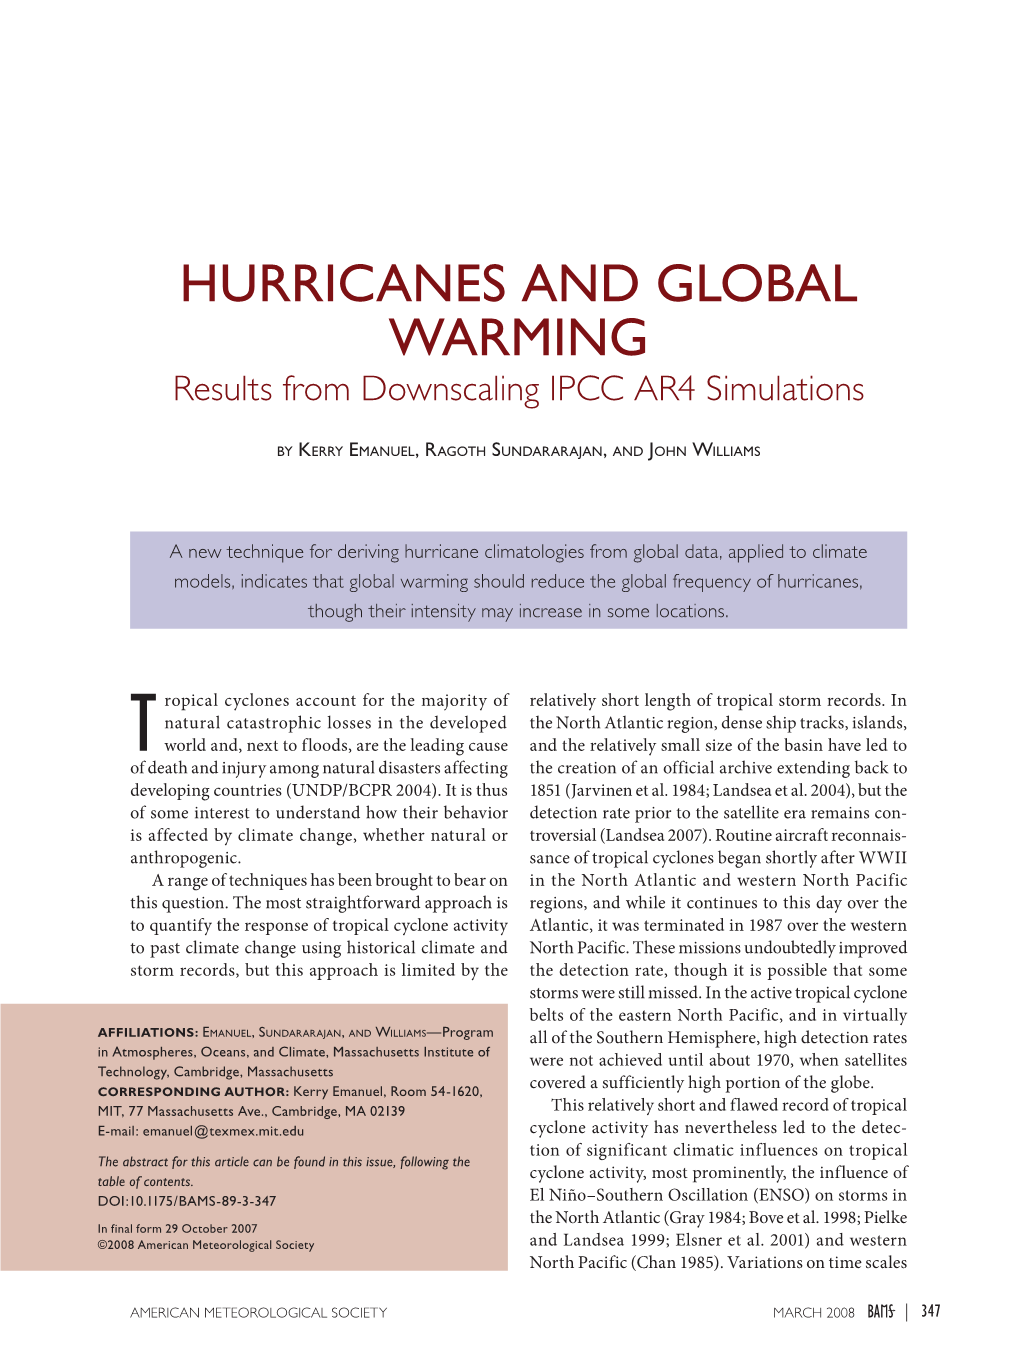 Hurricanes and Global Warming: Results From